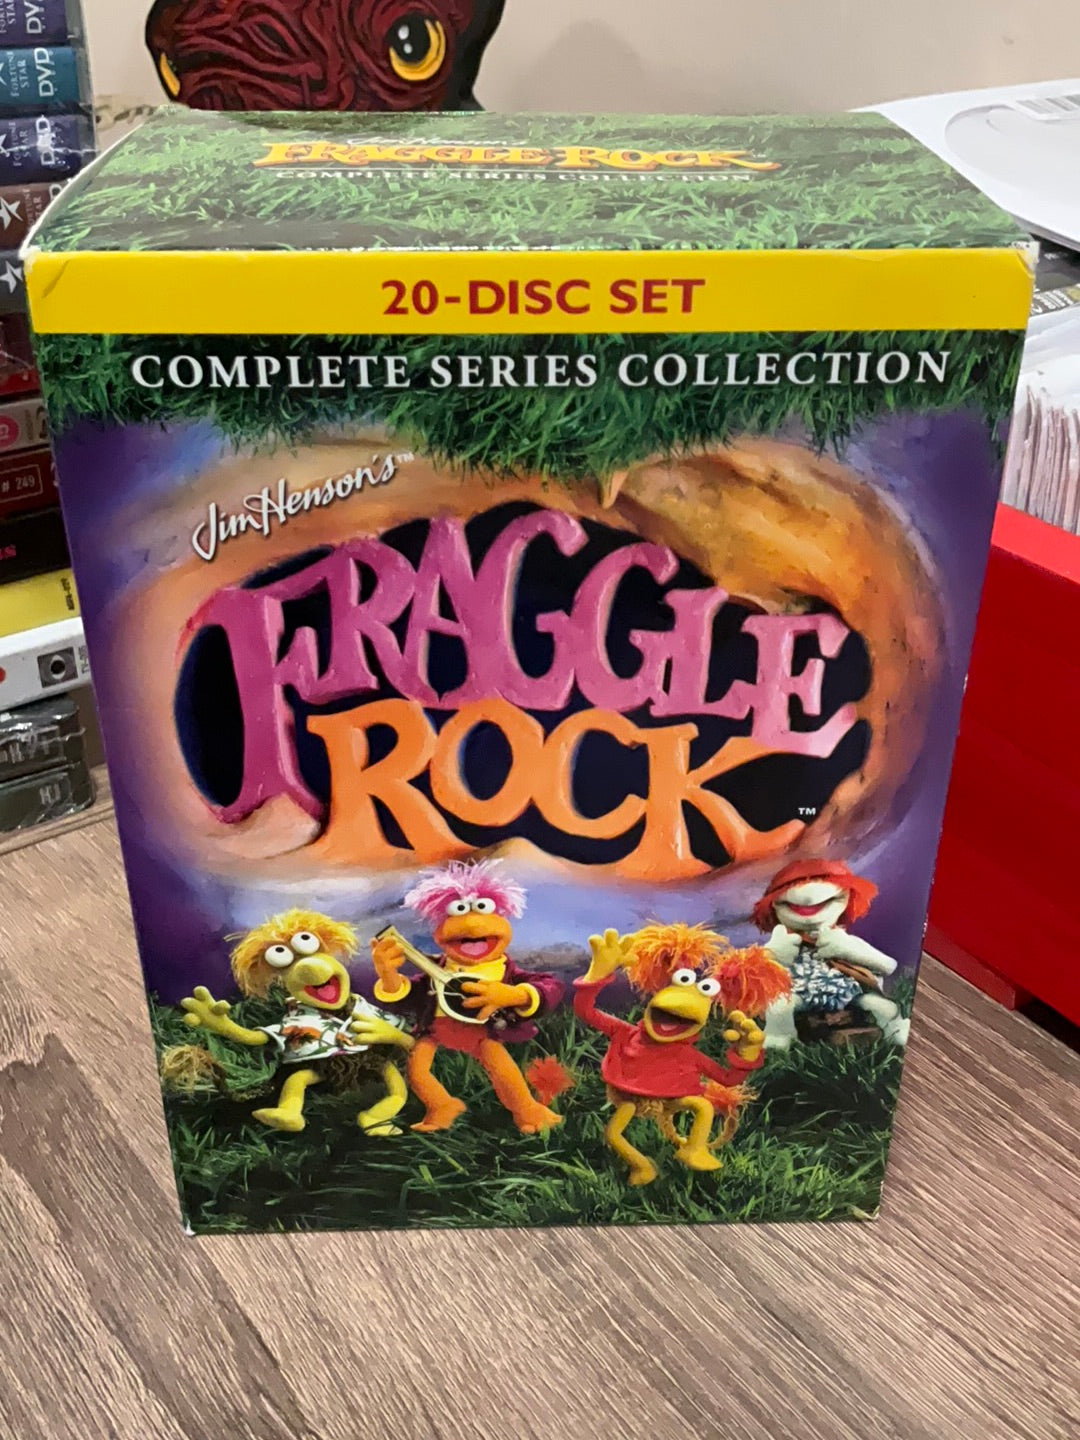 Fraggle Rock: Complete Series Collection (20-Disc Set) DVD USED